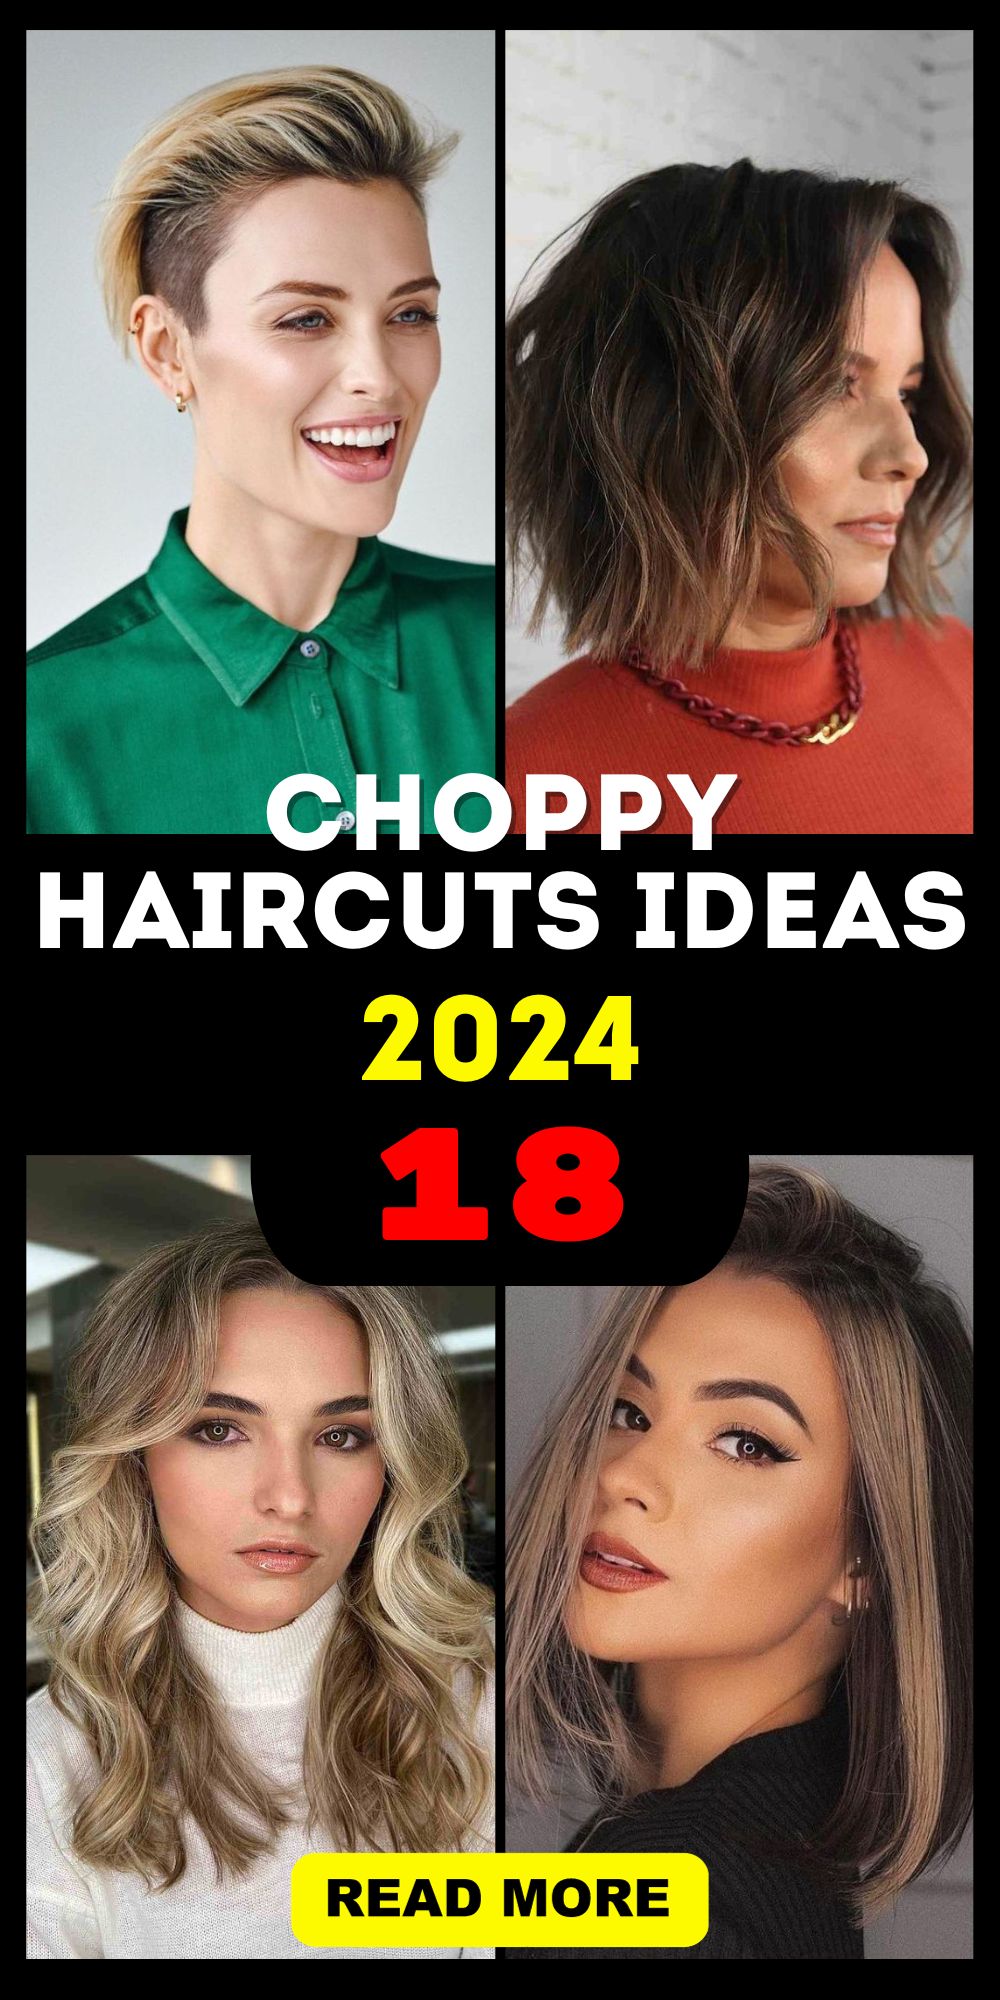 Choppy Haircuts 2024 Ideas: Trends, Styles, and Expert Tips for Women's Ha